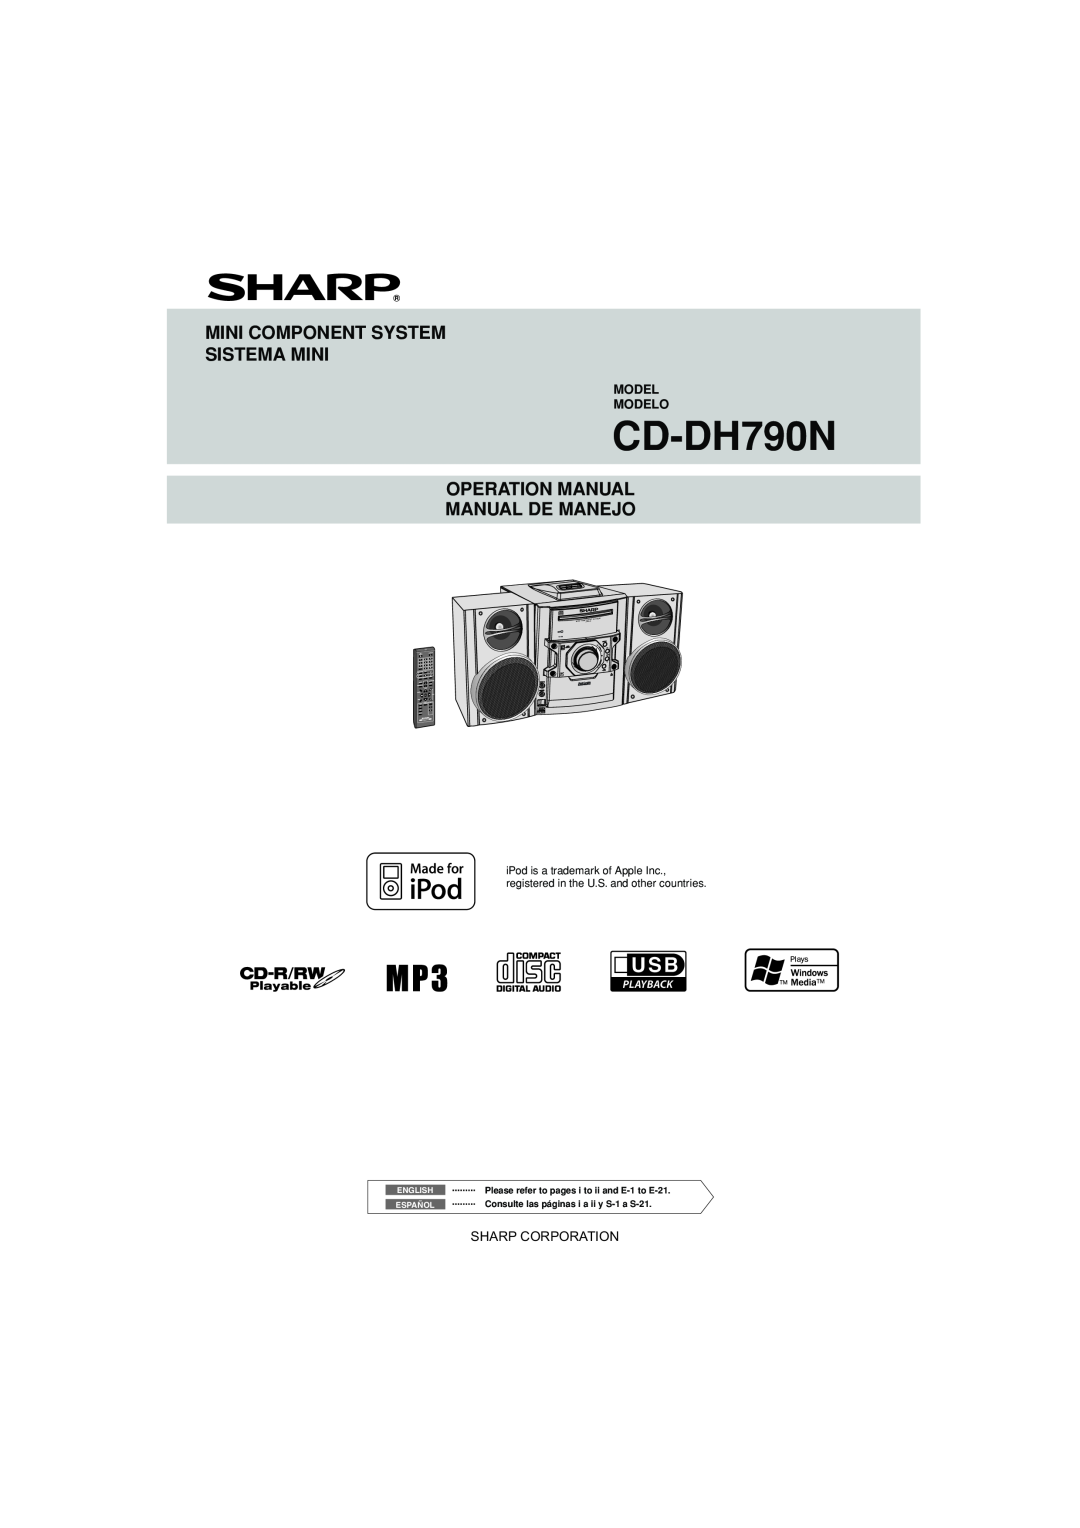 Sony CD-DH790N operation manual Mini Component System Sistema Mini, Operation Manual Manual De Manejo, Sharp Corporation 